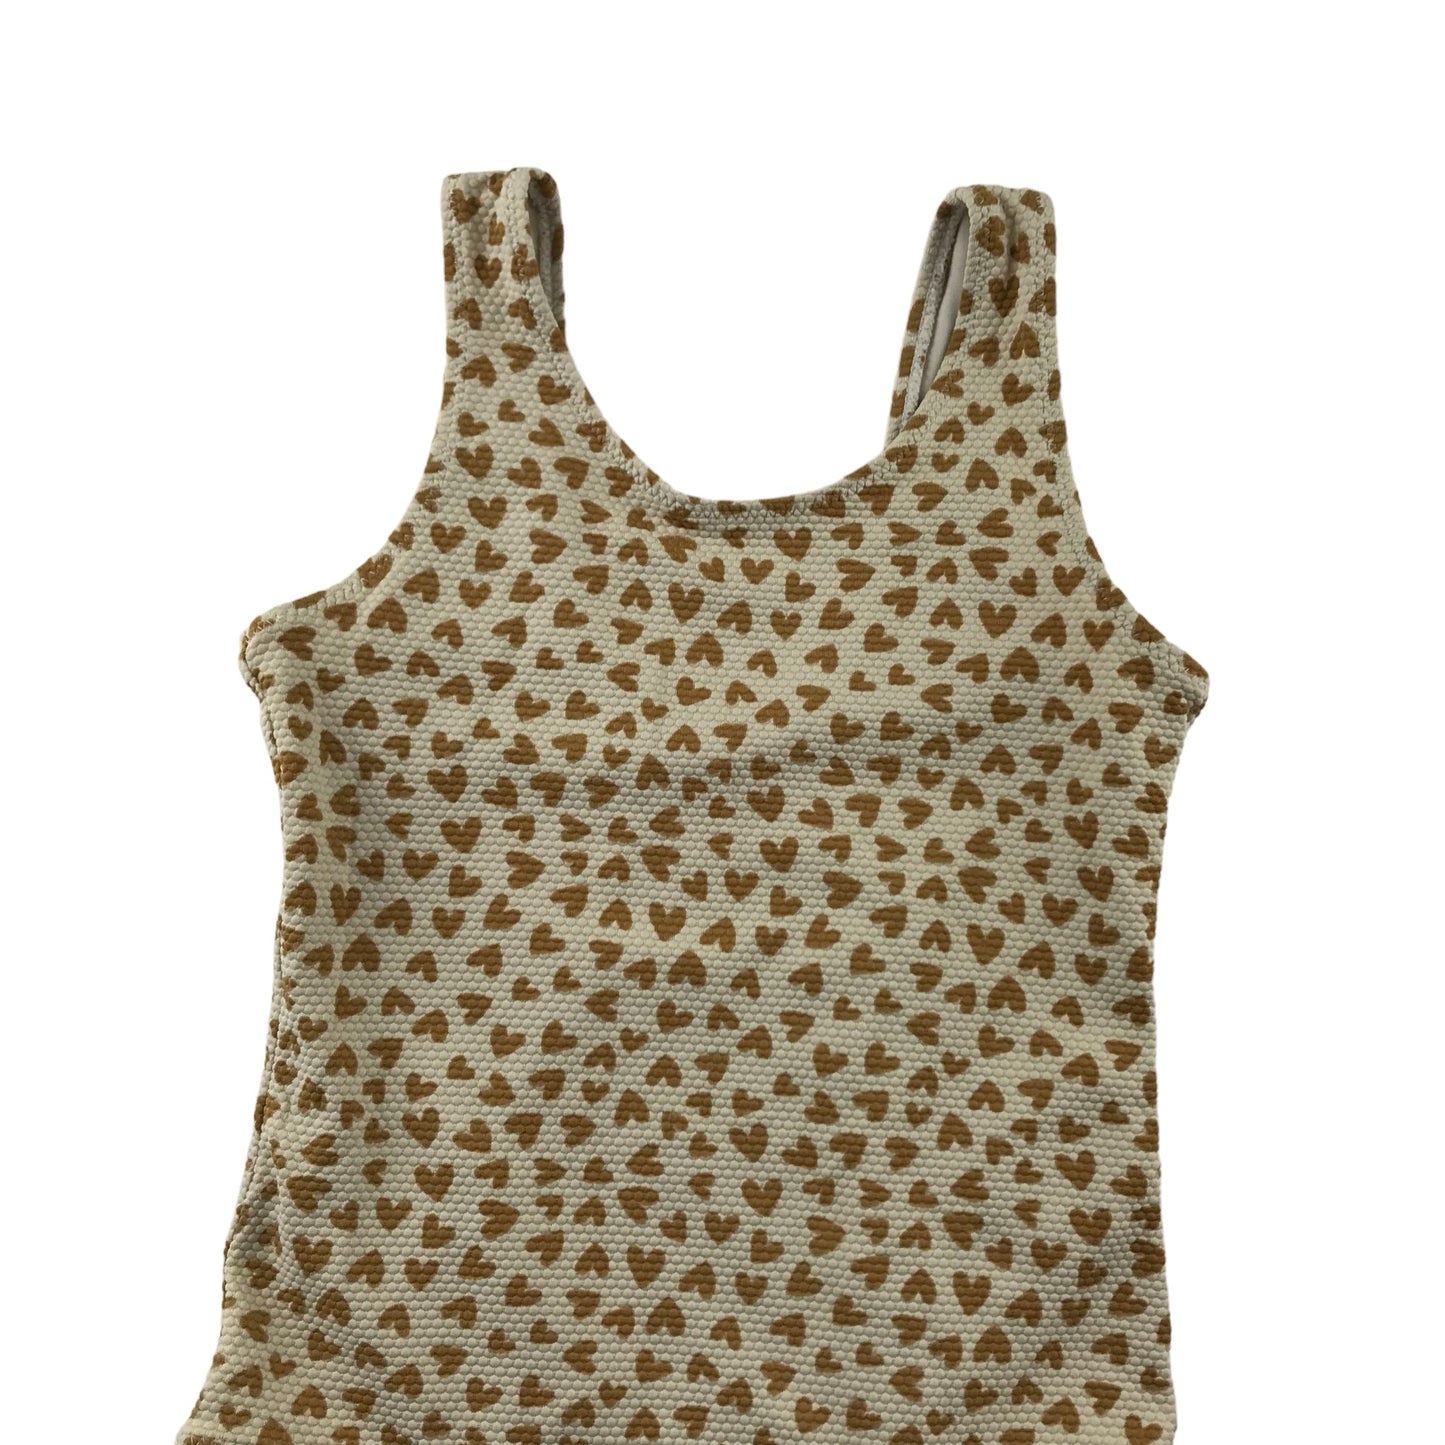 H&M Swimsuit Age 7 Beige and Brown Love Hearts One Piece Cossie